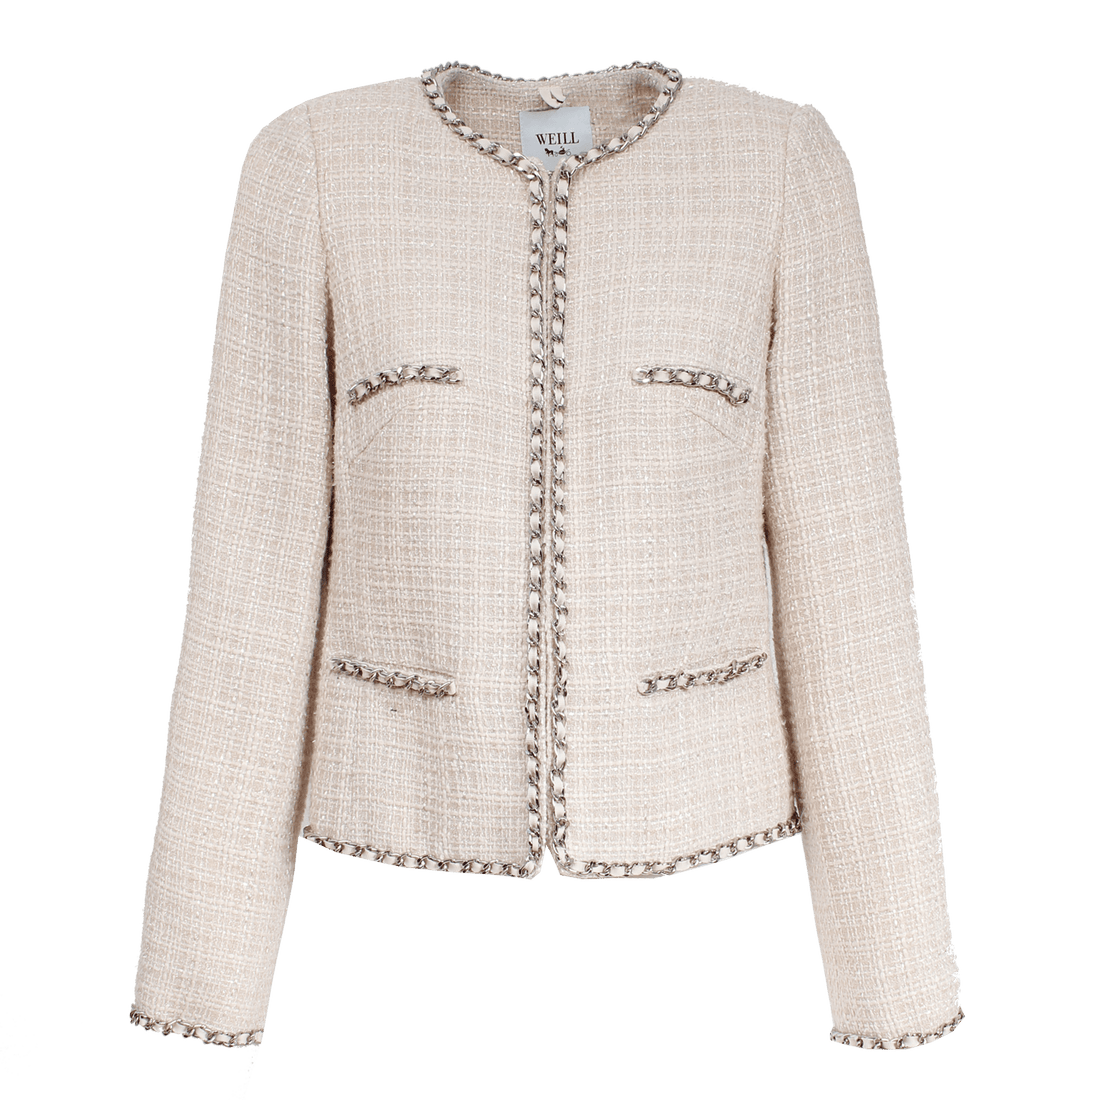 Weill Coats and Jackets Weill Mariata Jacket in Beige With Cream Flecks and Chain Edge 131028 izzi-of-baslow